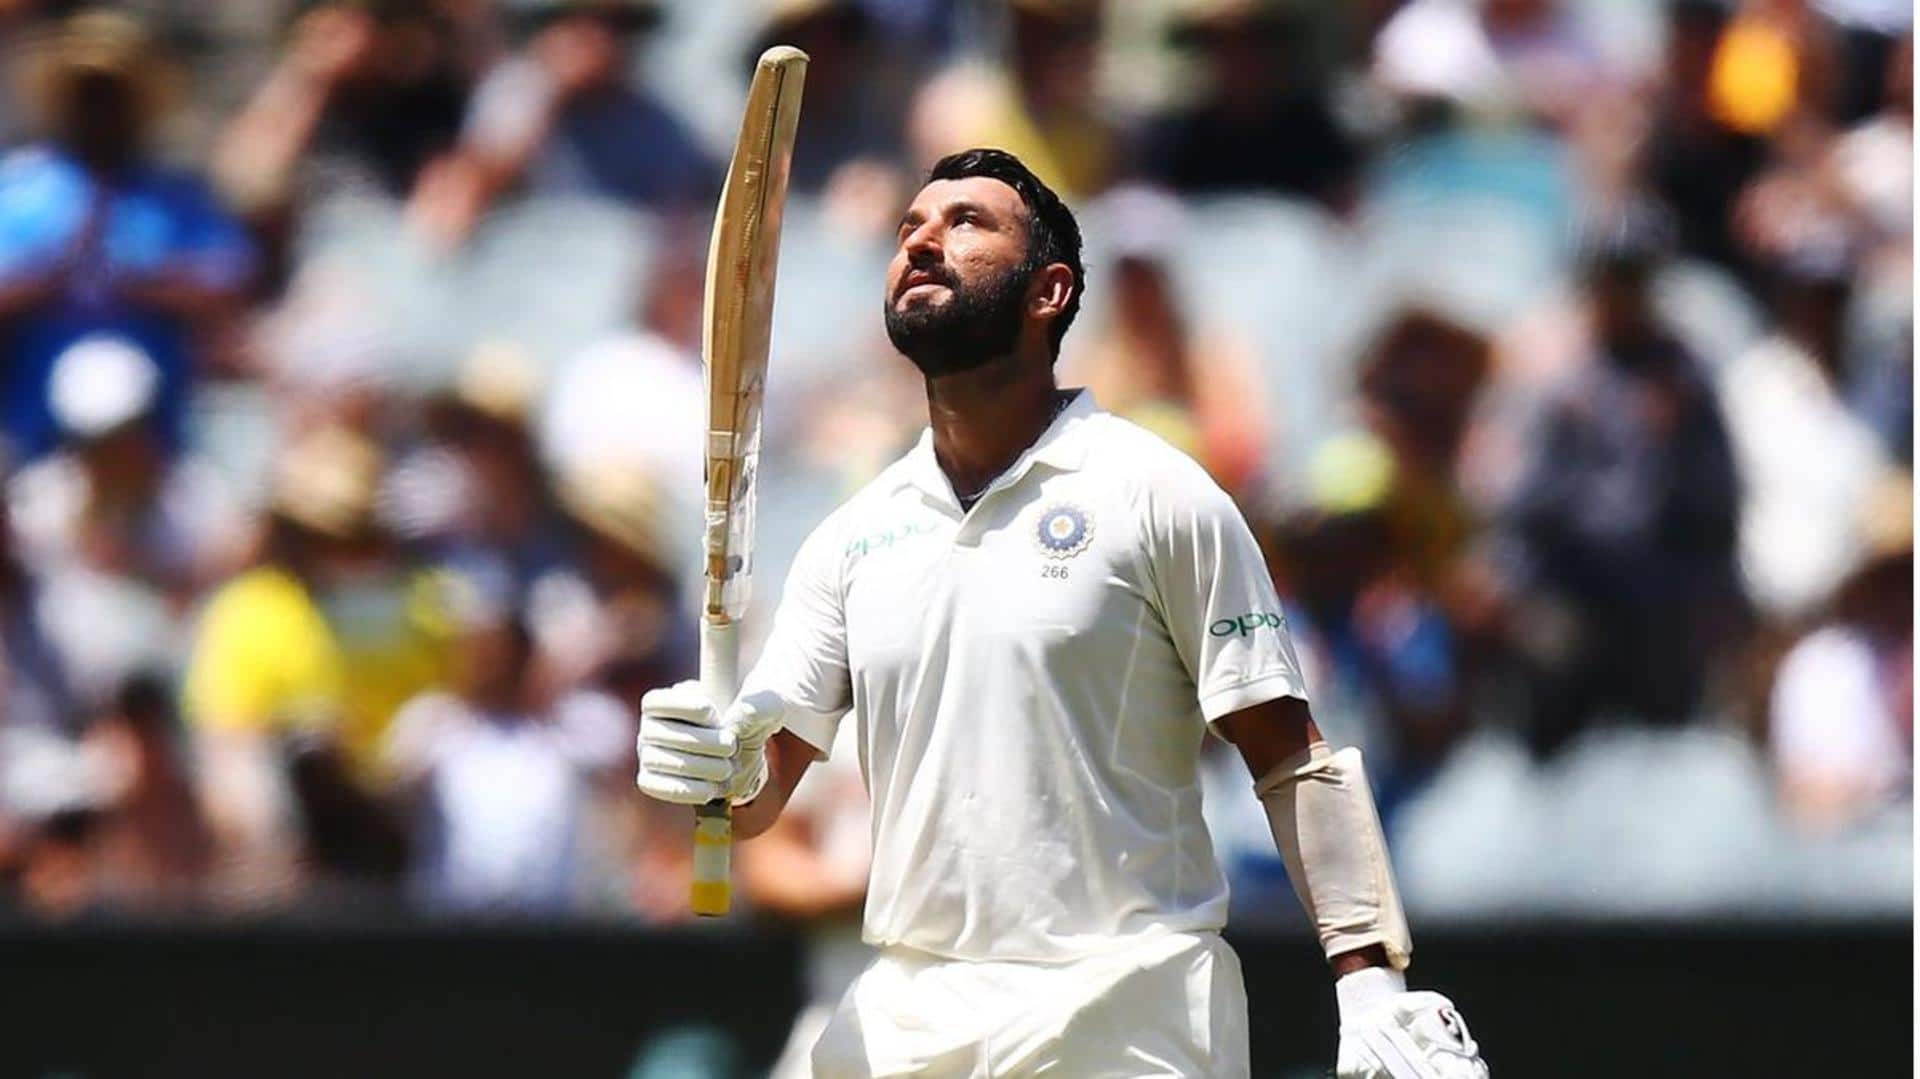 Has Pujara struggled post Test comeback? His numbers state otherwise